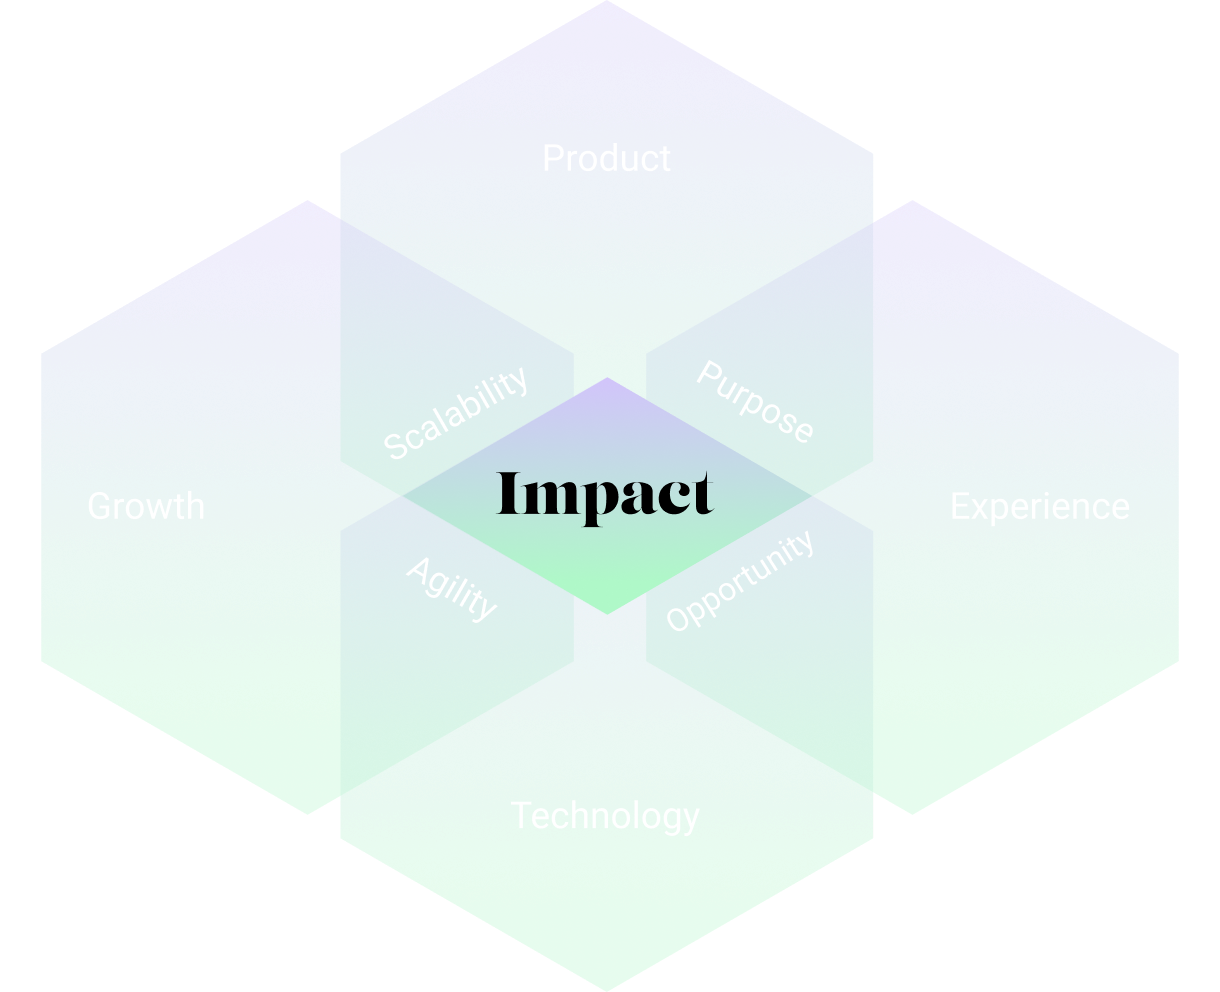 Diagram showing the different aspects of Impact